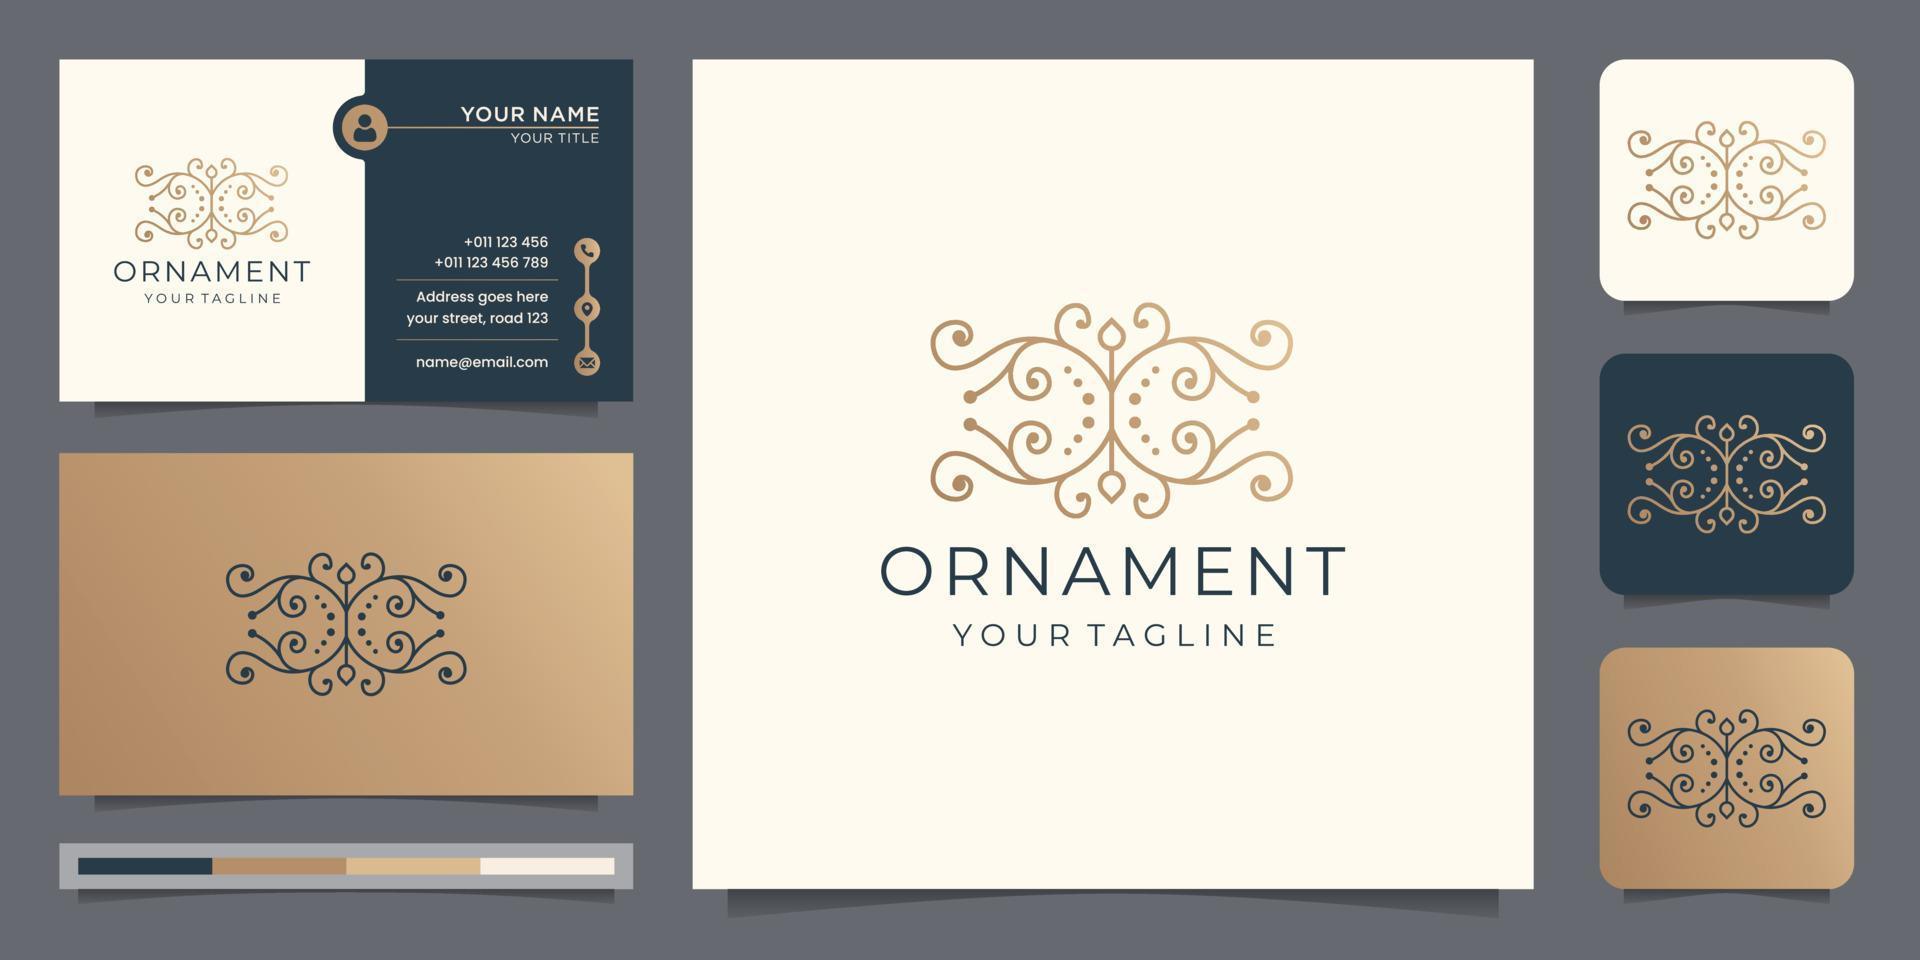 linear style ornament logo with business card design.luxury slim style decoration, vintage, element. vector